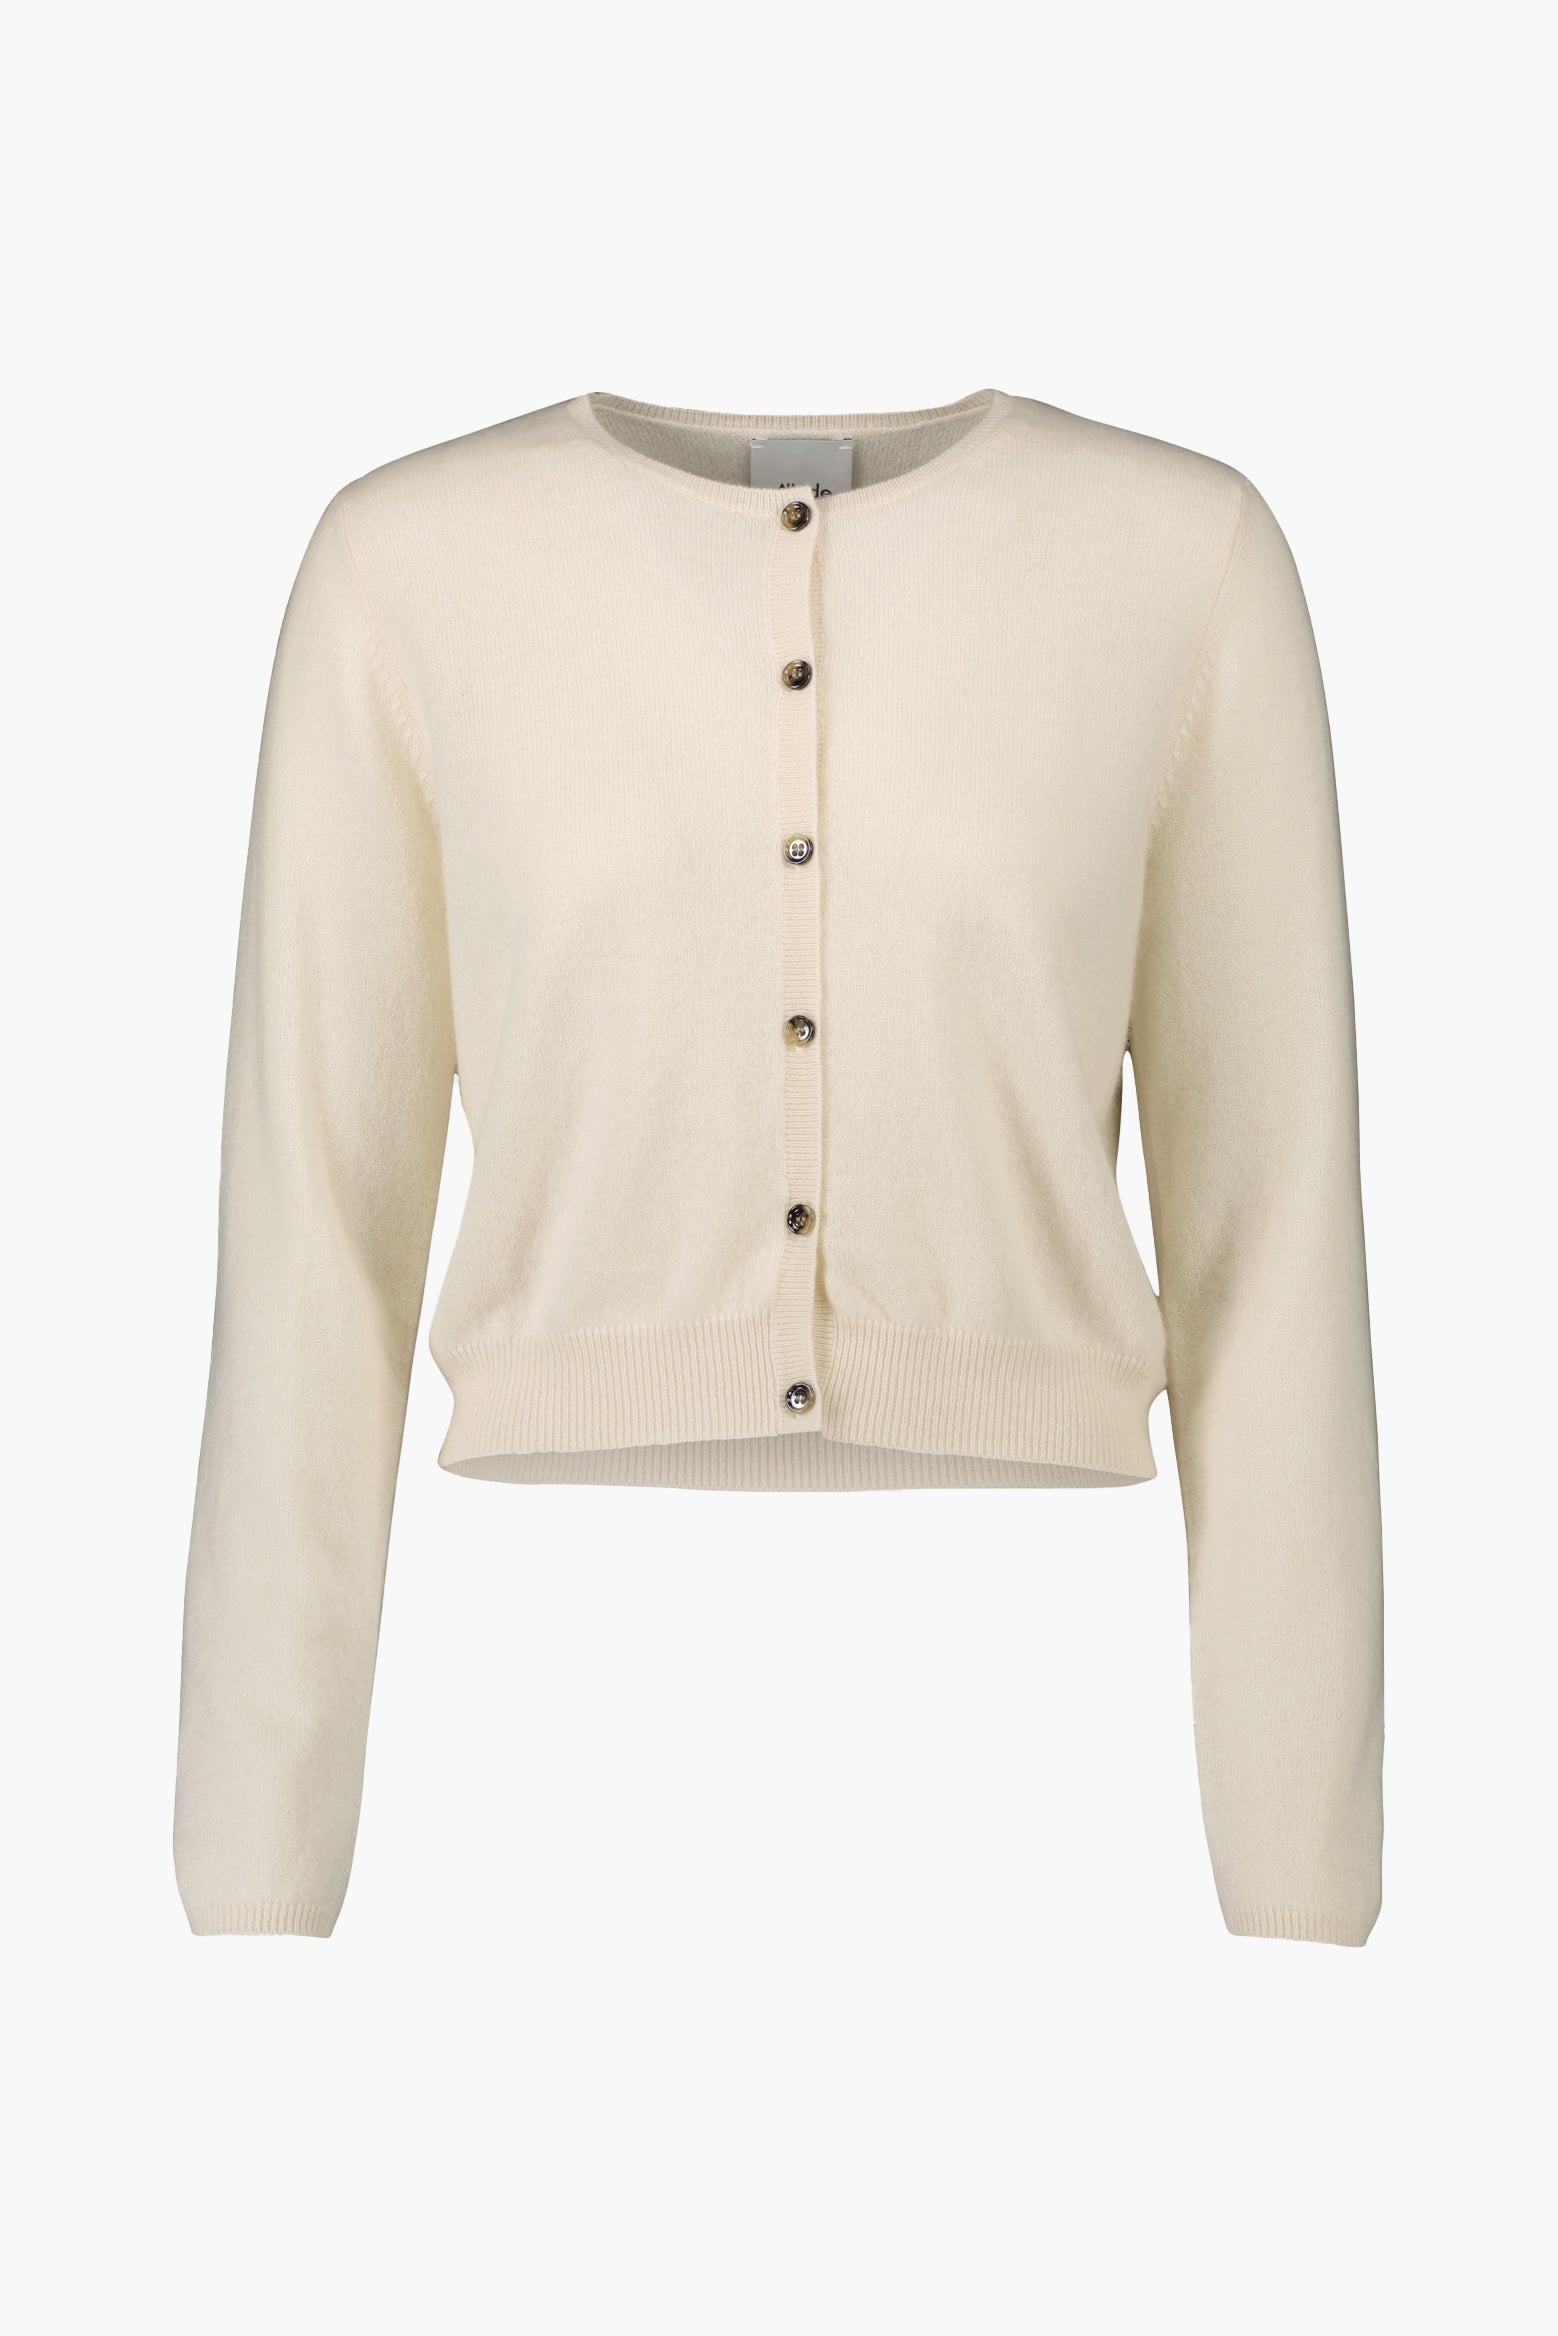 ALLUDE Cardigan in Ivory available at The New Trend Australia